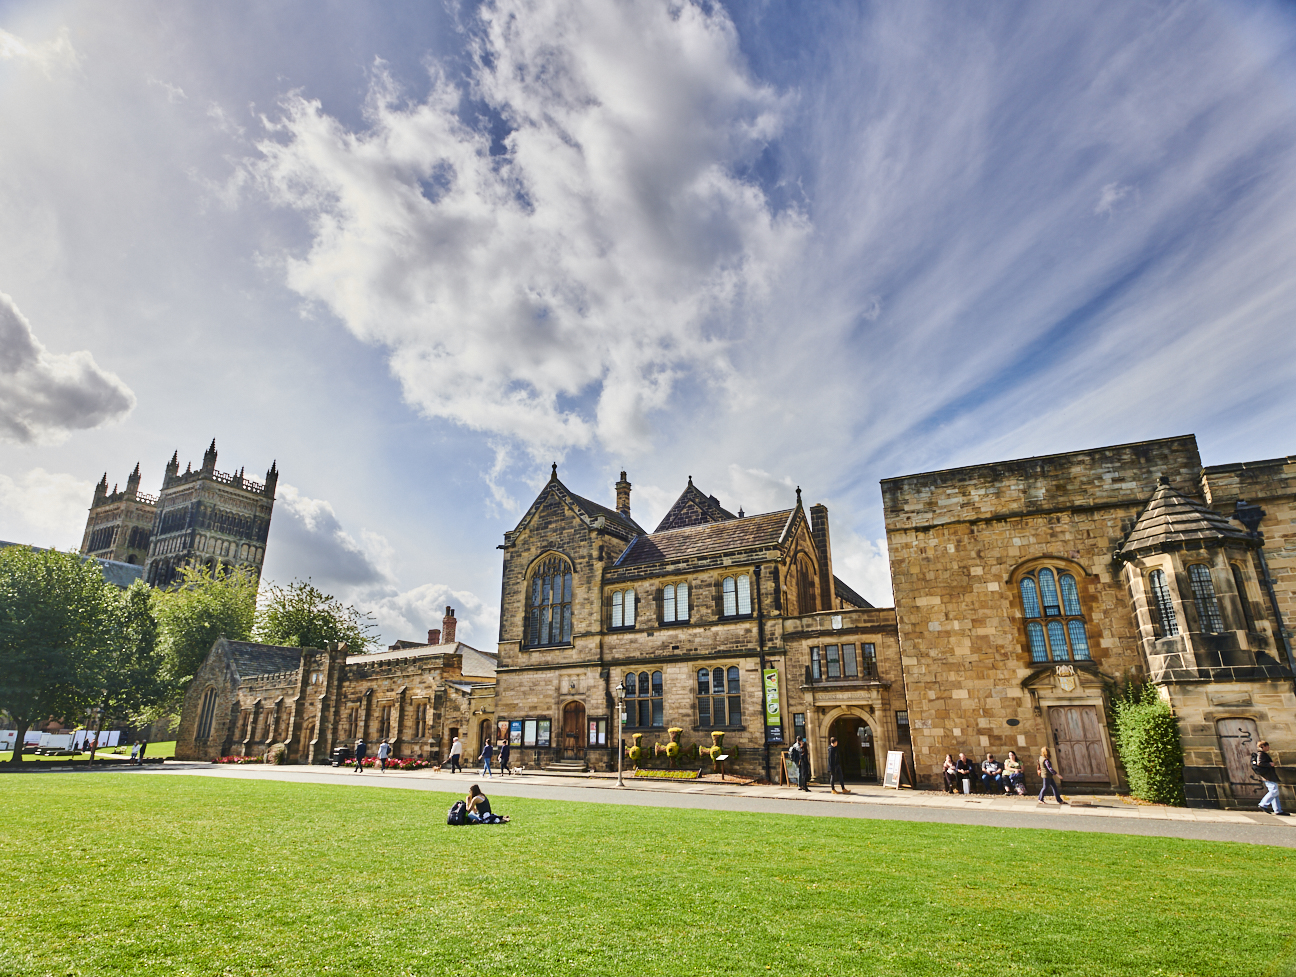 View of Palace Green Library building with Durham Cathedral in the background